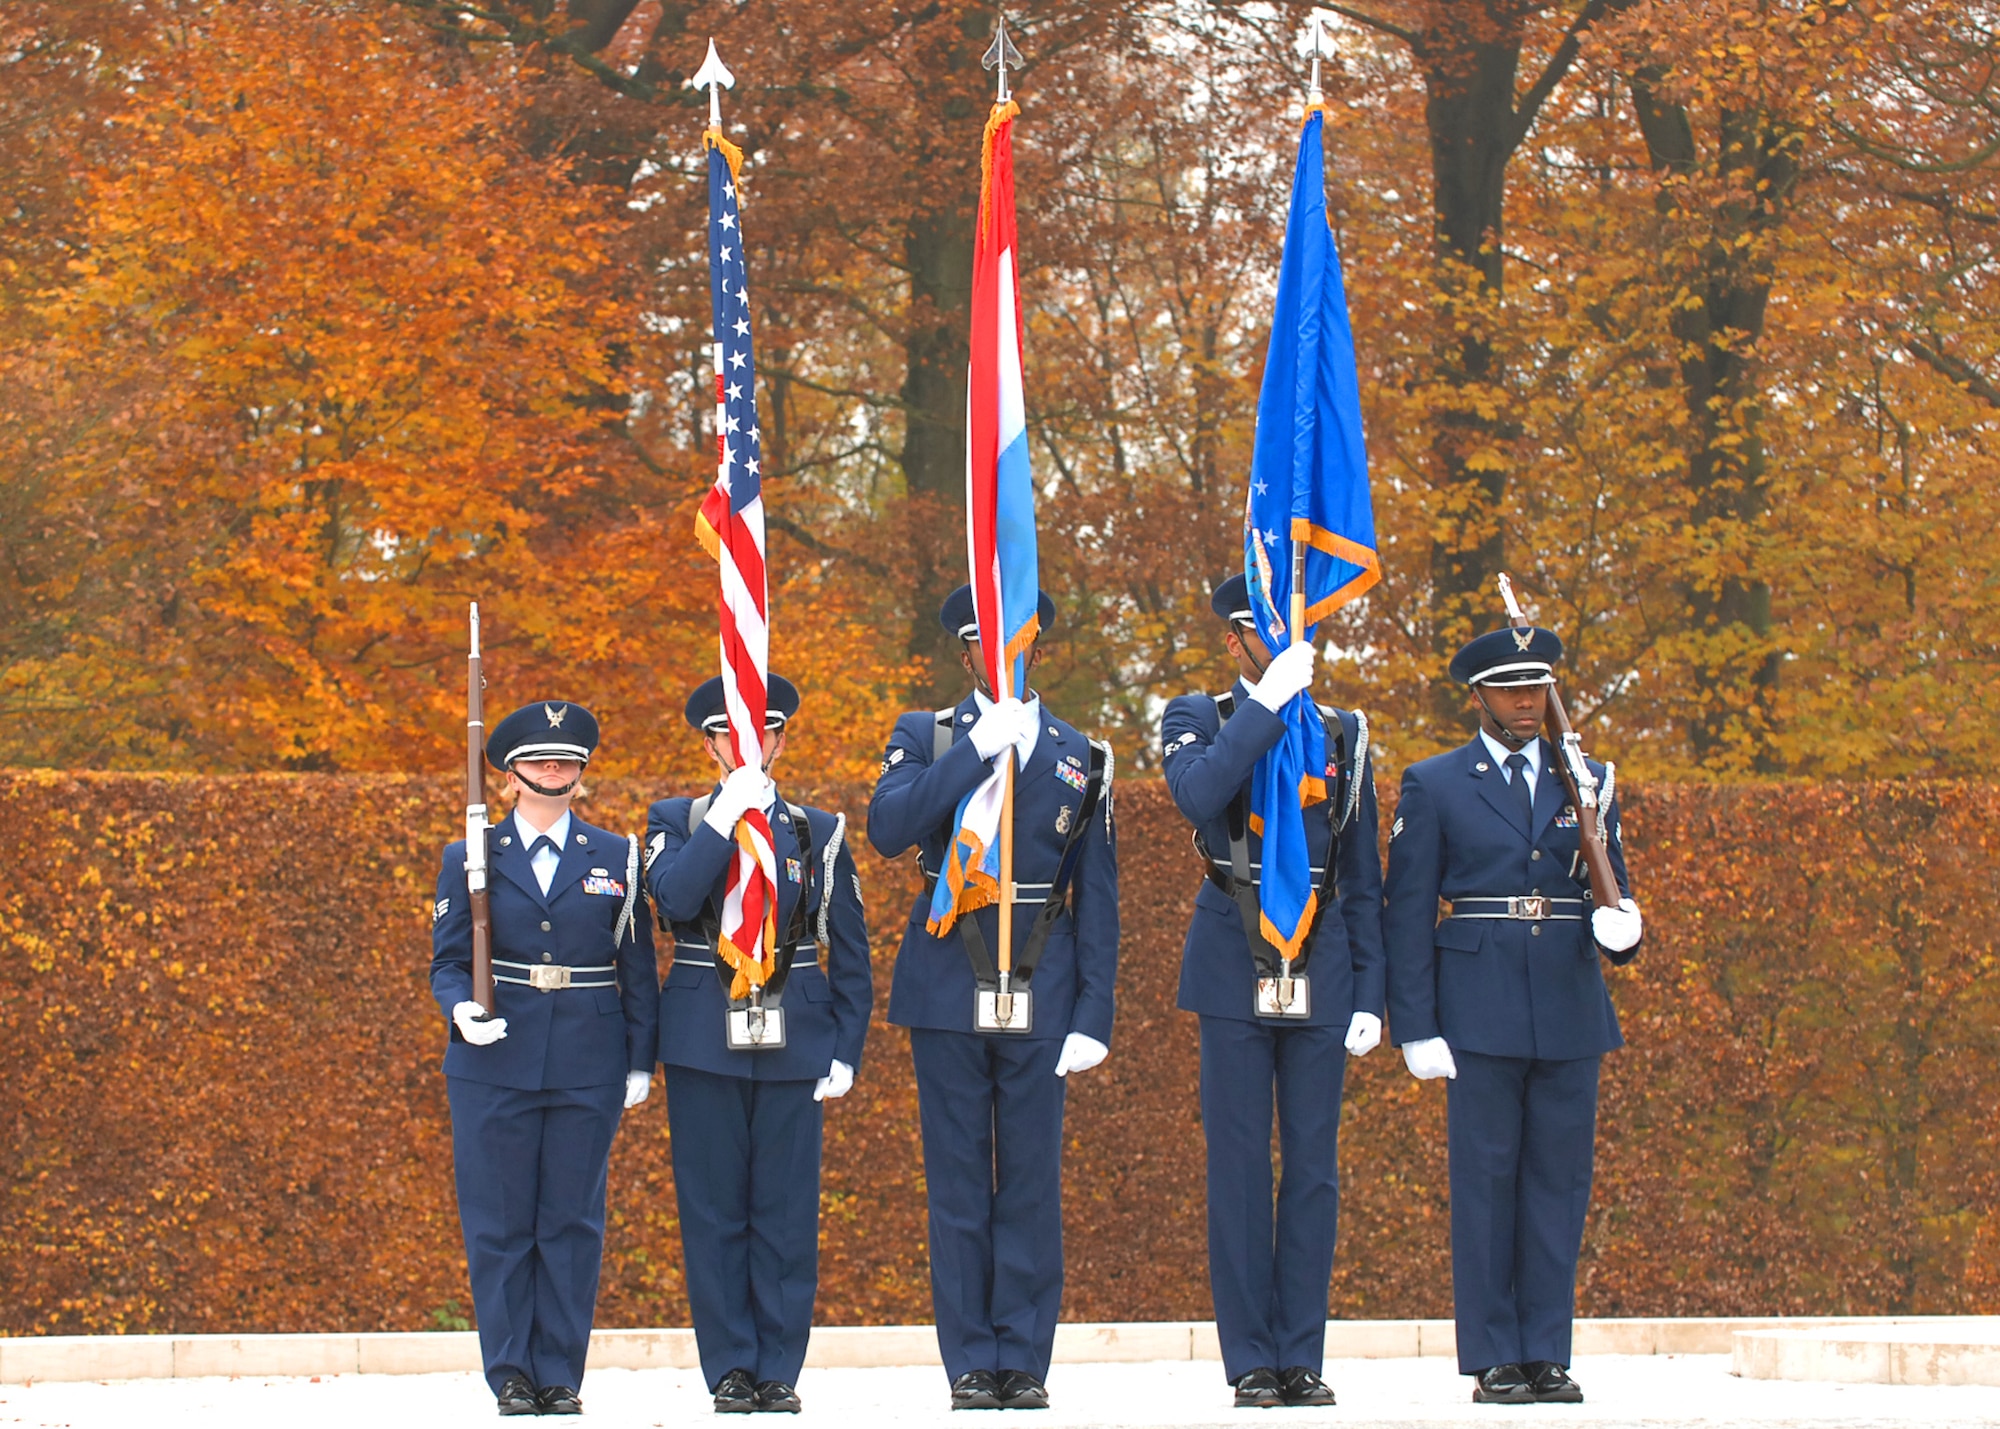 SPANGDAHLEM AIR BASE, Germany -- The 702nd Munitions Support Squadron Color Guard stands at attention before posting the colors for the annual Veterans Day ceremony at the Luxembourg American Cemetery and Memorial in Luxembourg City Nov. 11.  The 50.5 acre cemetery, which is one of 14 American cemeteries established overseas after World War II, contains the remains of more than 5,000 American servicemembers who died fighting in World War II. (U.S. Air Force photo/Airman 1st Class Nick Wilson)